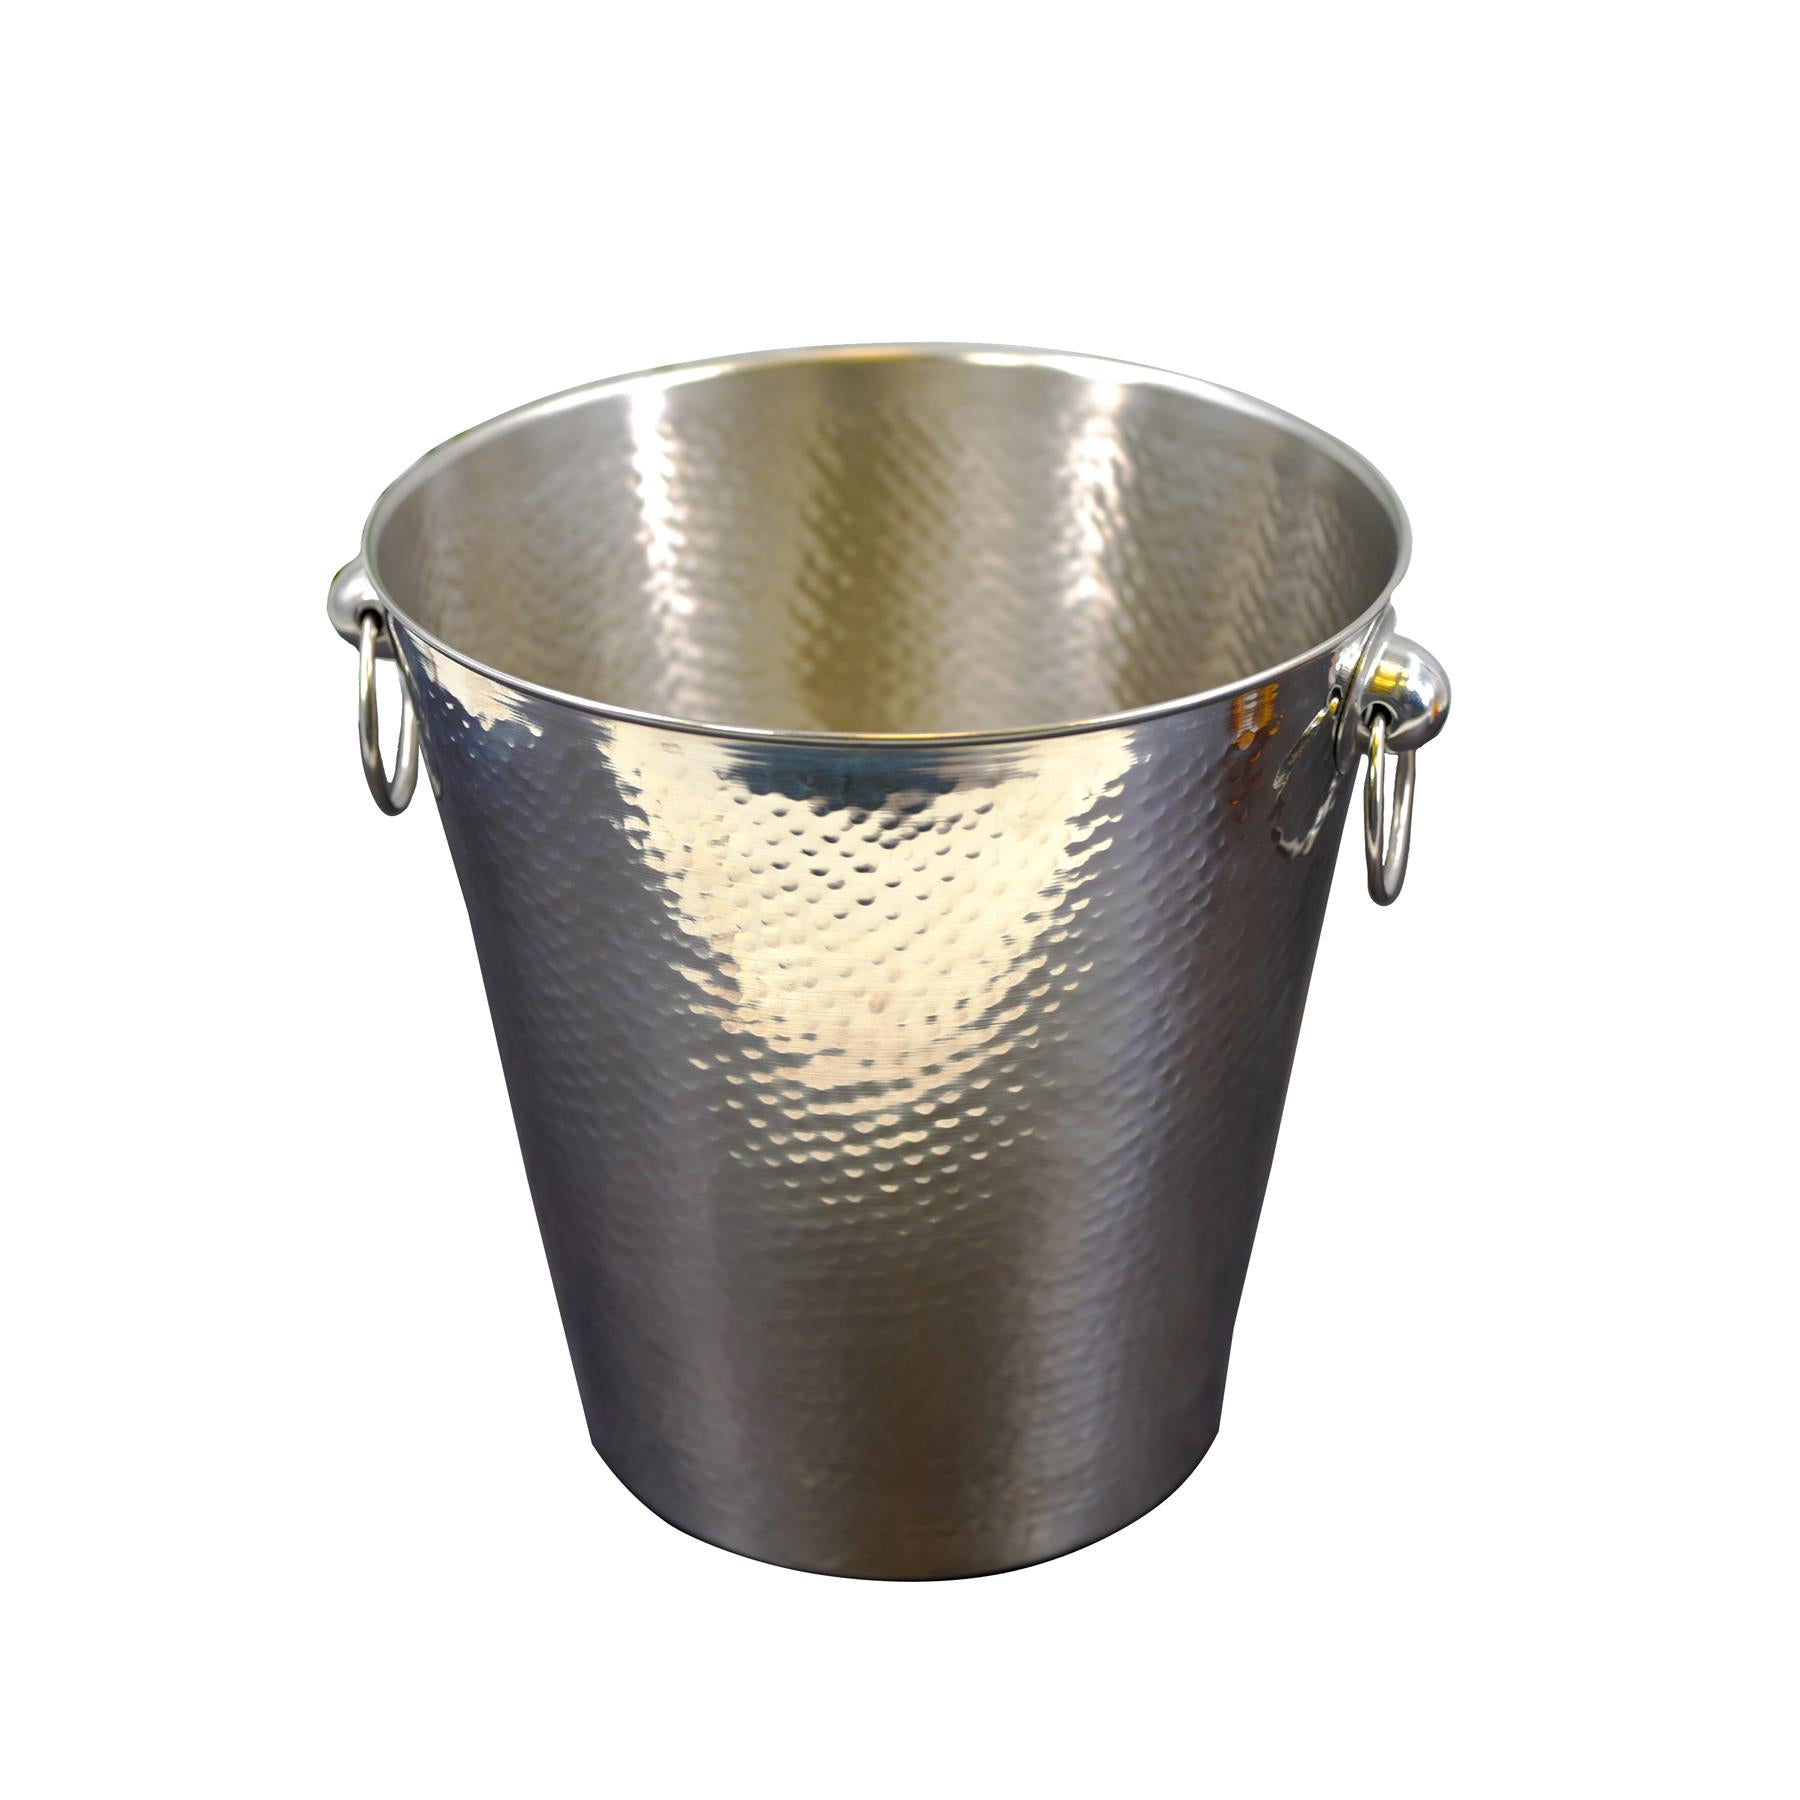 Geezy Champagne Cooler Stainless Steel Ice Bucket Hammered Champagne Drink Wine Cooler With Handles